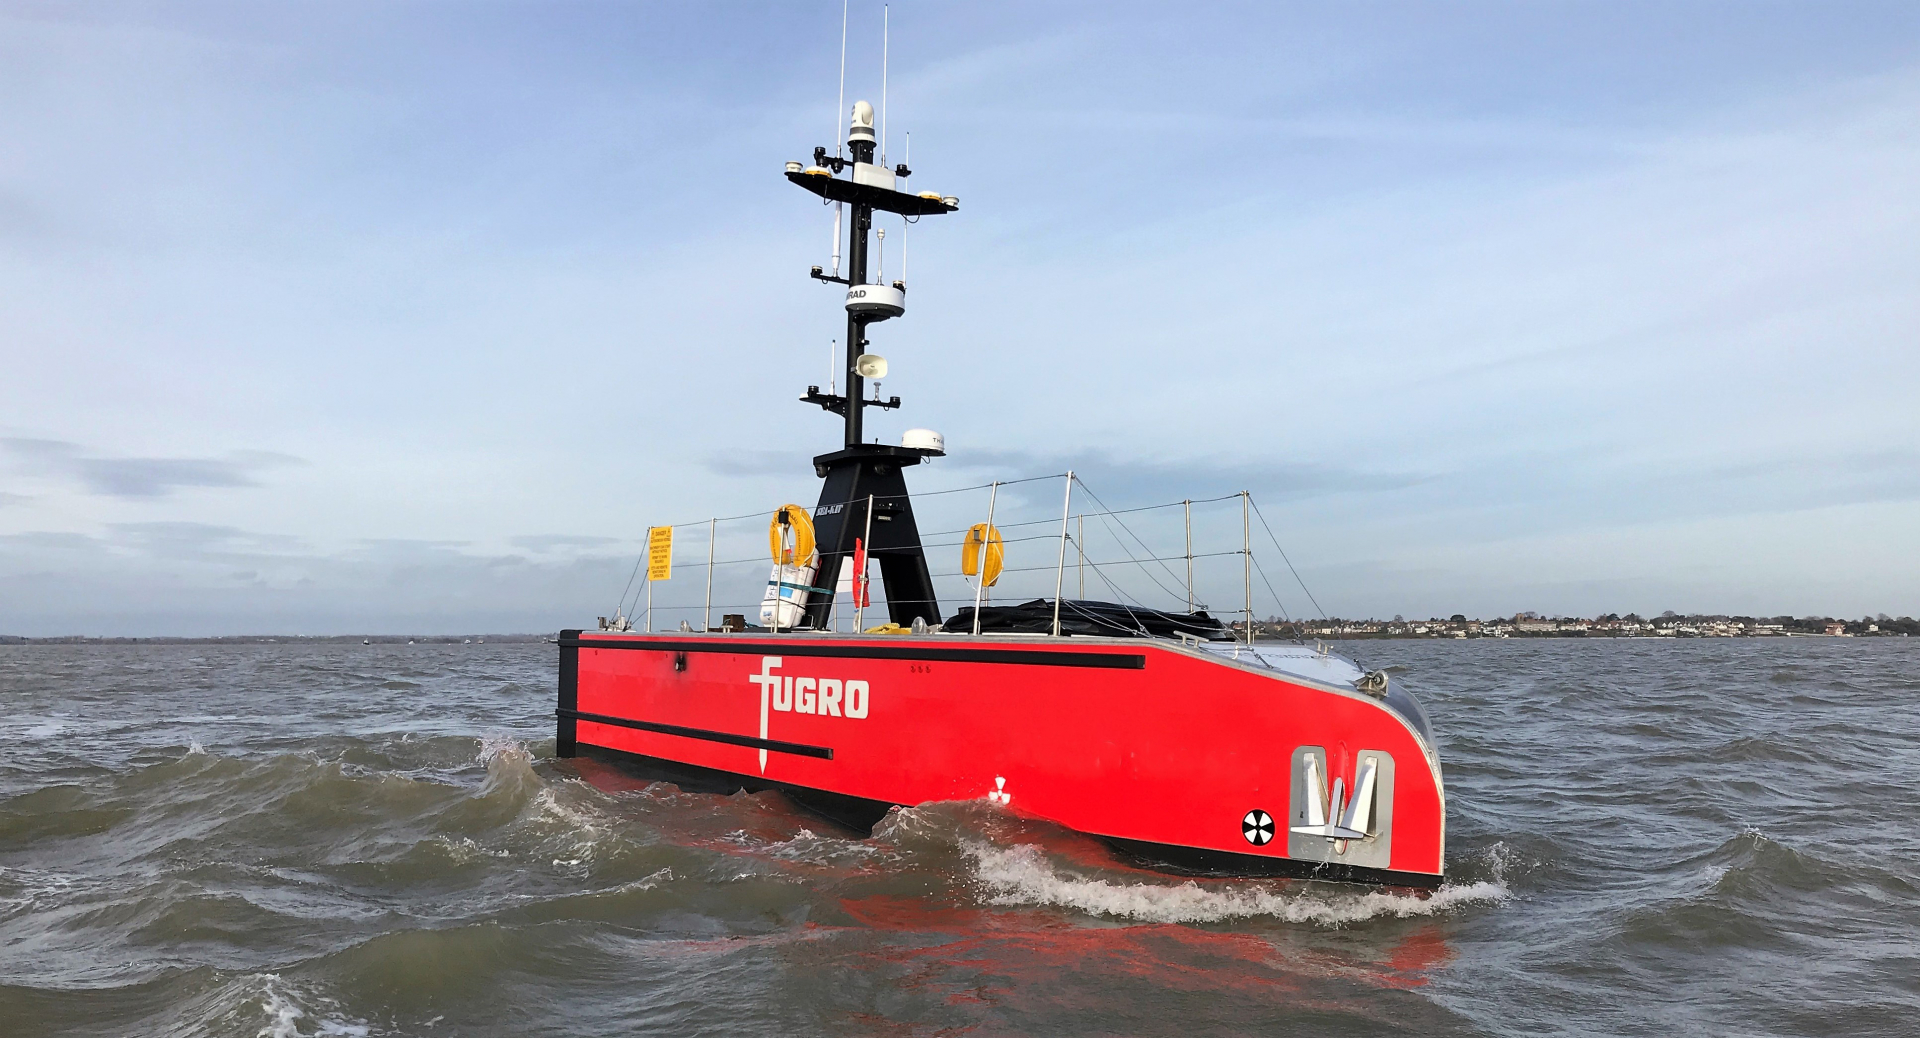 SEA-KIT has achieved the feat of operating an uncrewed vessel over the horizon. This Shell Ocean Discovery XPRIZE award-winning technology has now matured into a viable commercial offering. (Image credit:  Fugro 12m USV, SEA-KIT International)